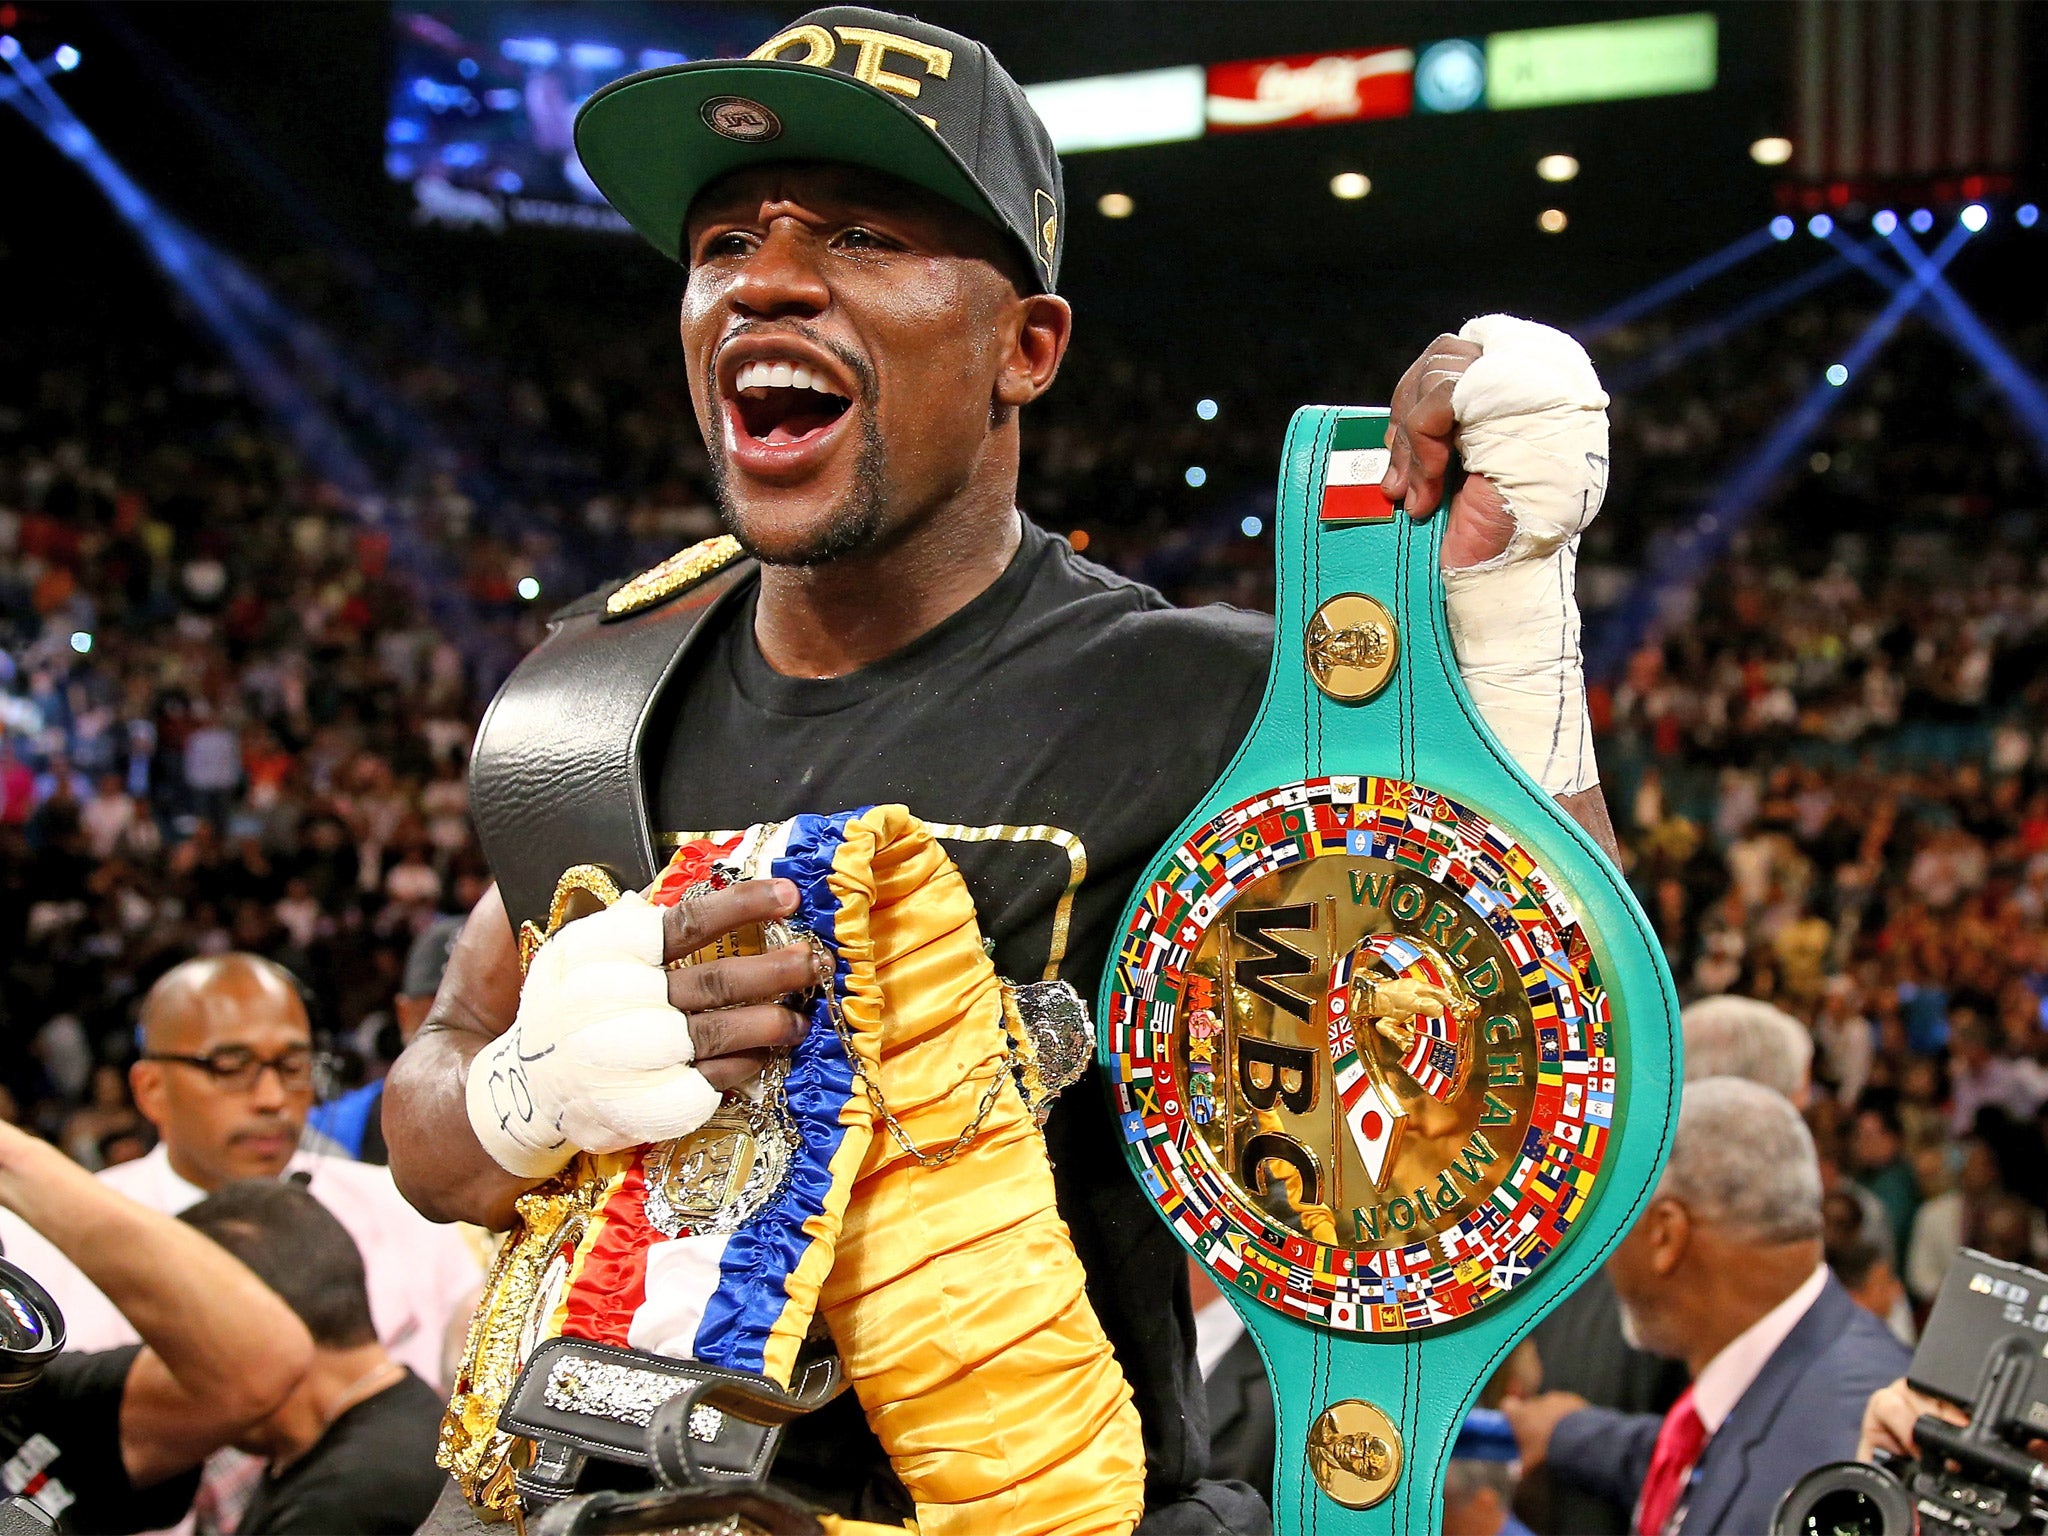 Floyd Mayweather faces Marcos Maidana in Las Vegas on Saturday, his 46th pro fight